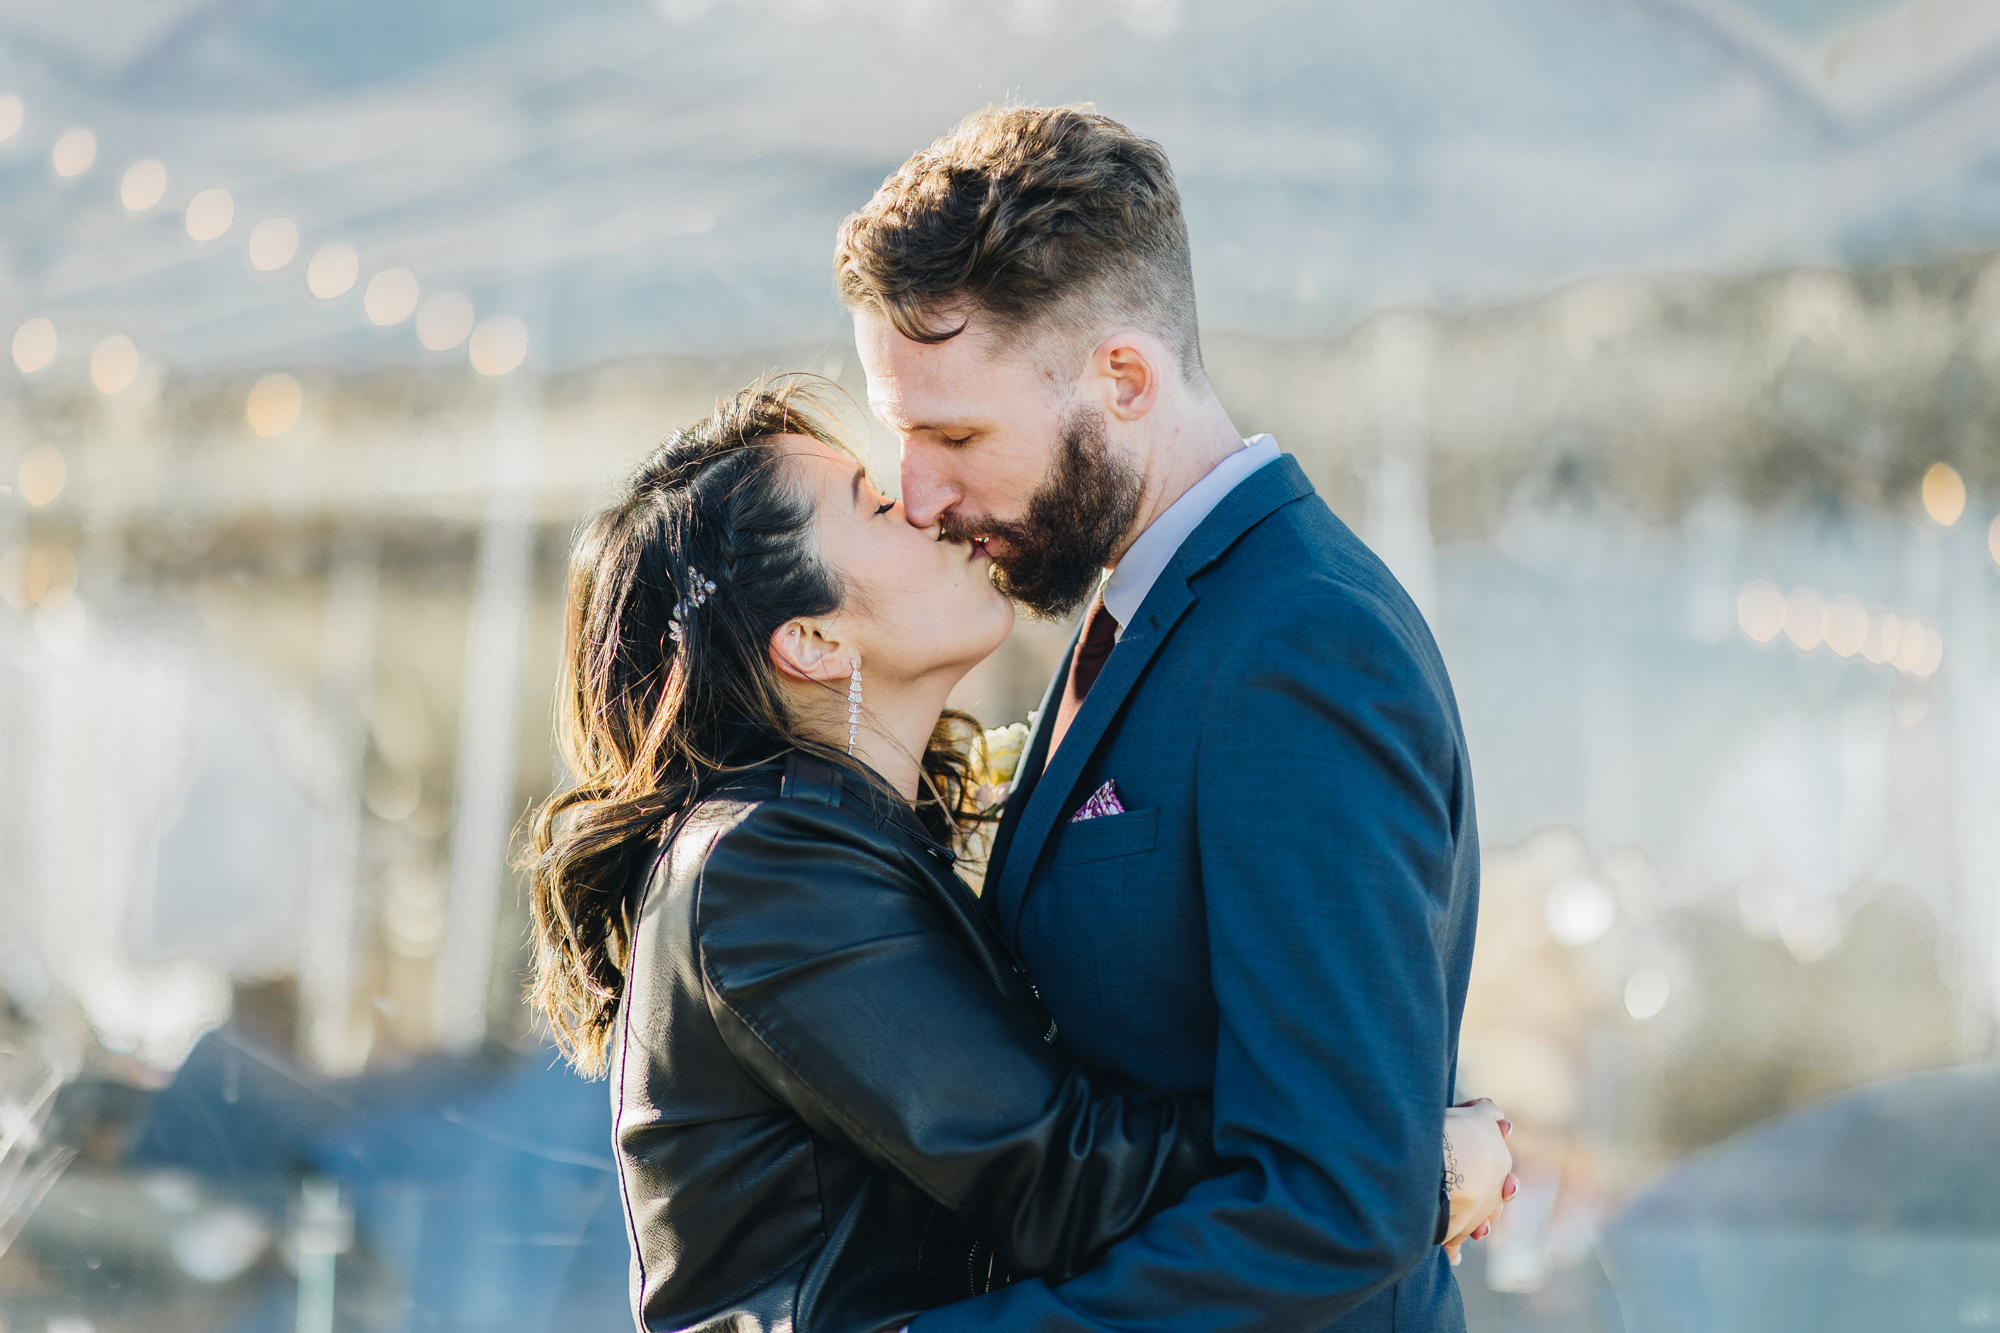 Fun and Candid Fall DUMBO Elopement with New York views and foliage